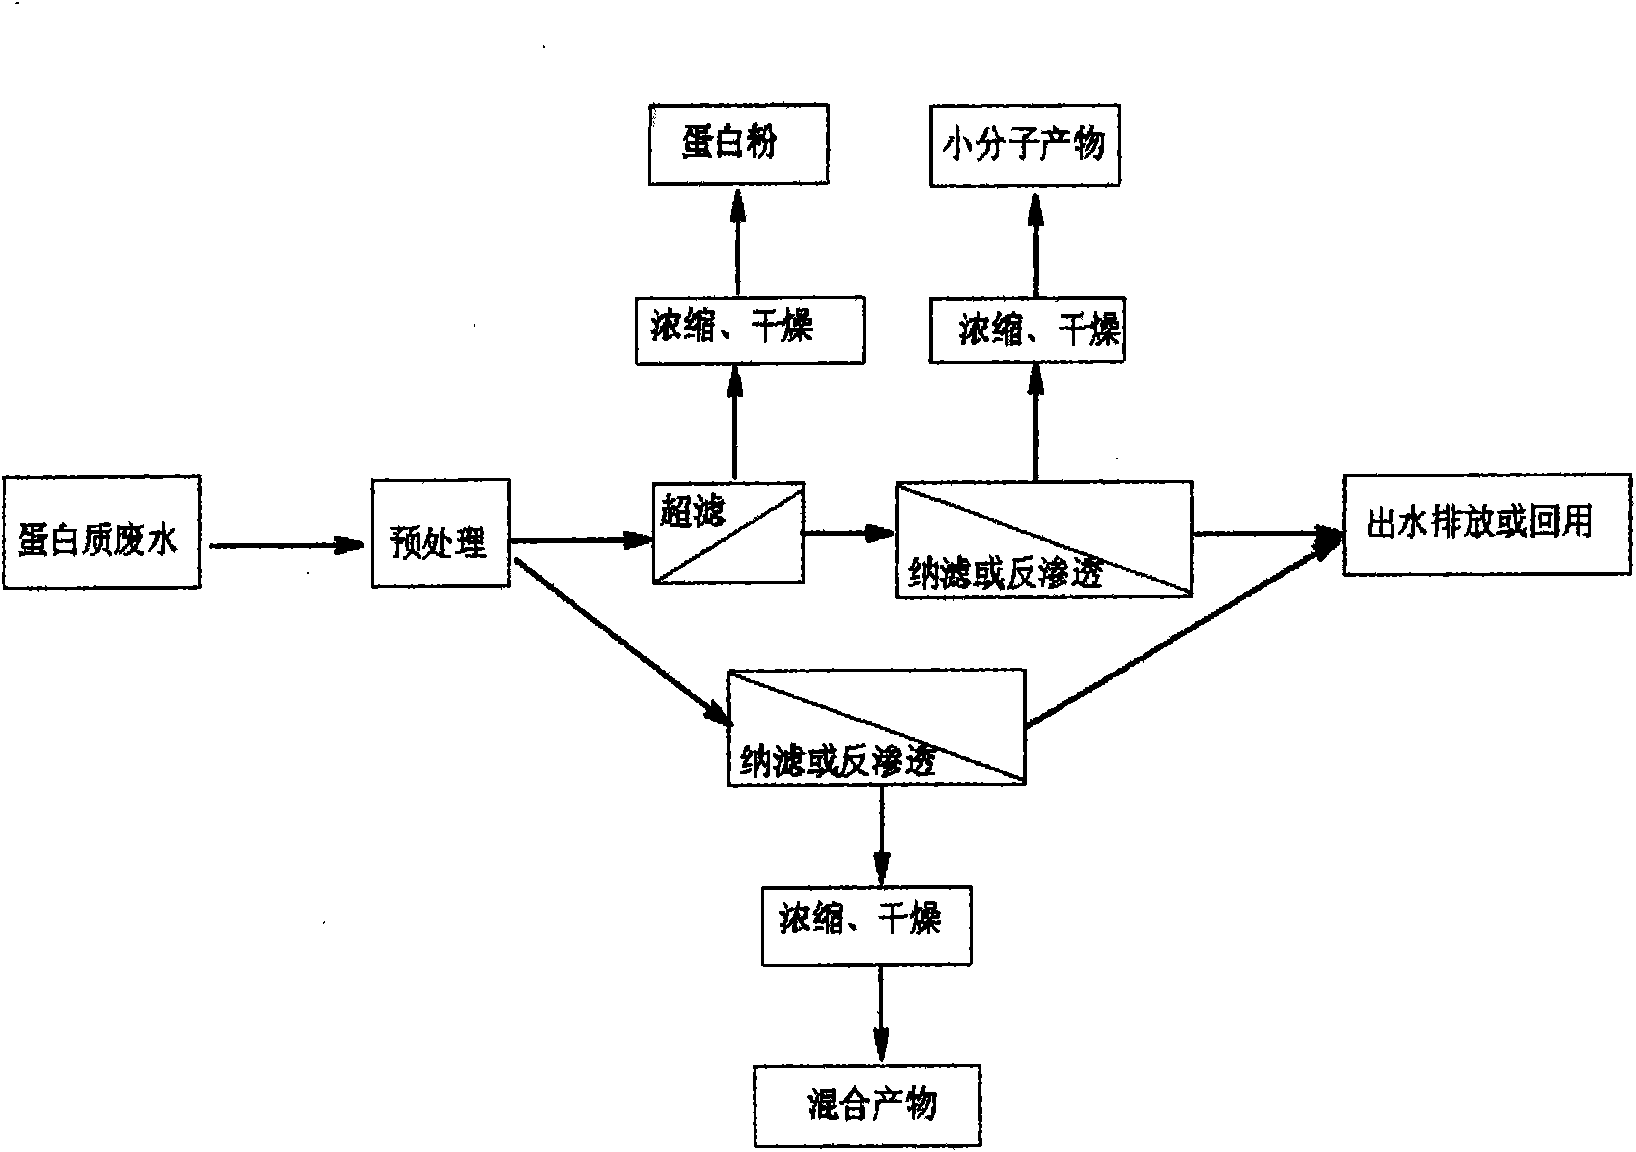 Recovery processing method of protein waste water